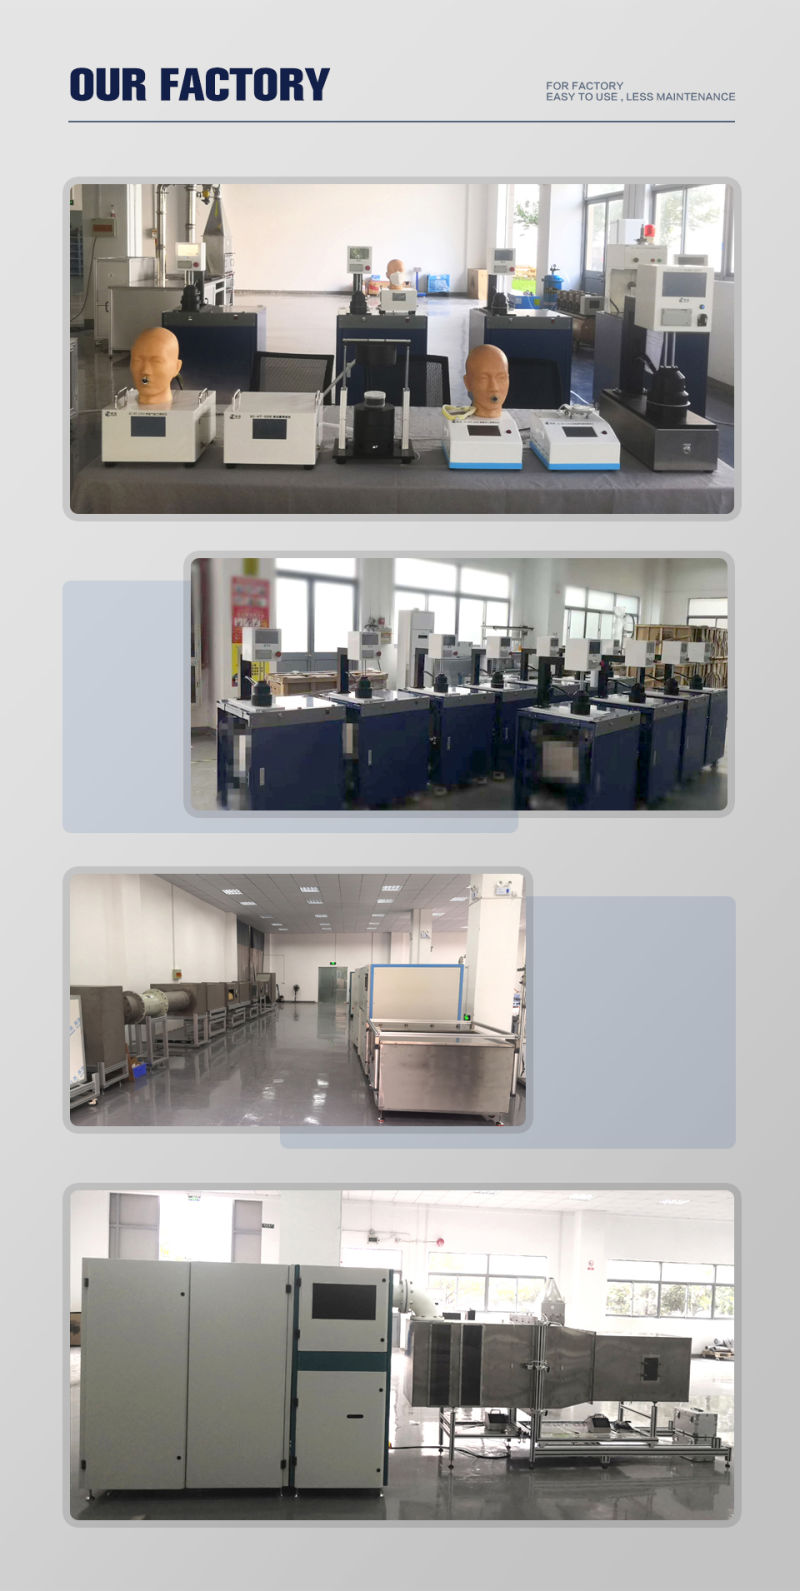 Filter Element Particulate Filtration Efficiency Testing Equipment